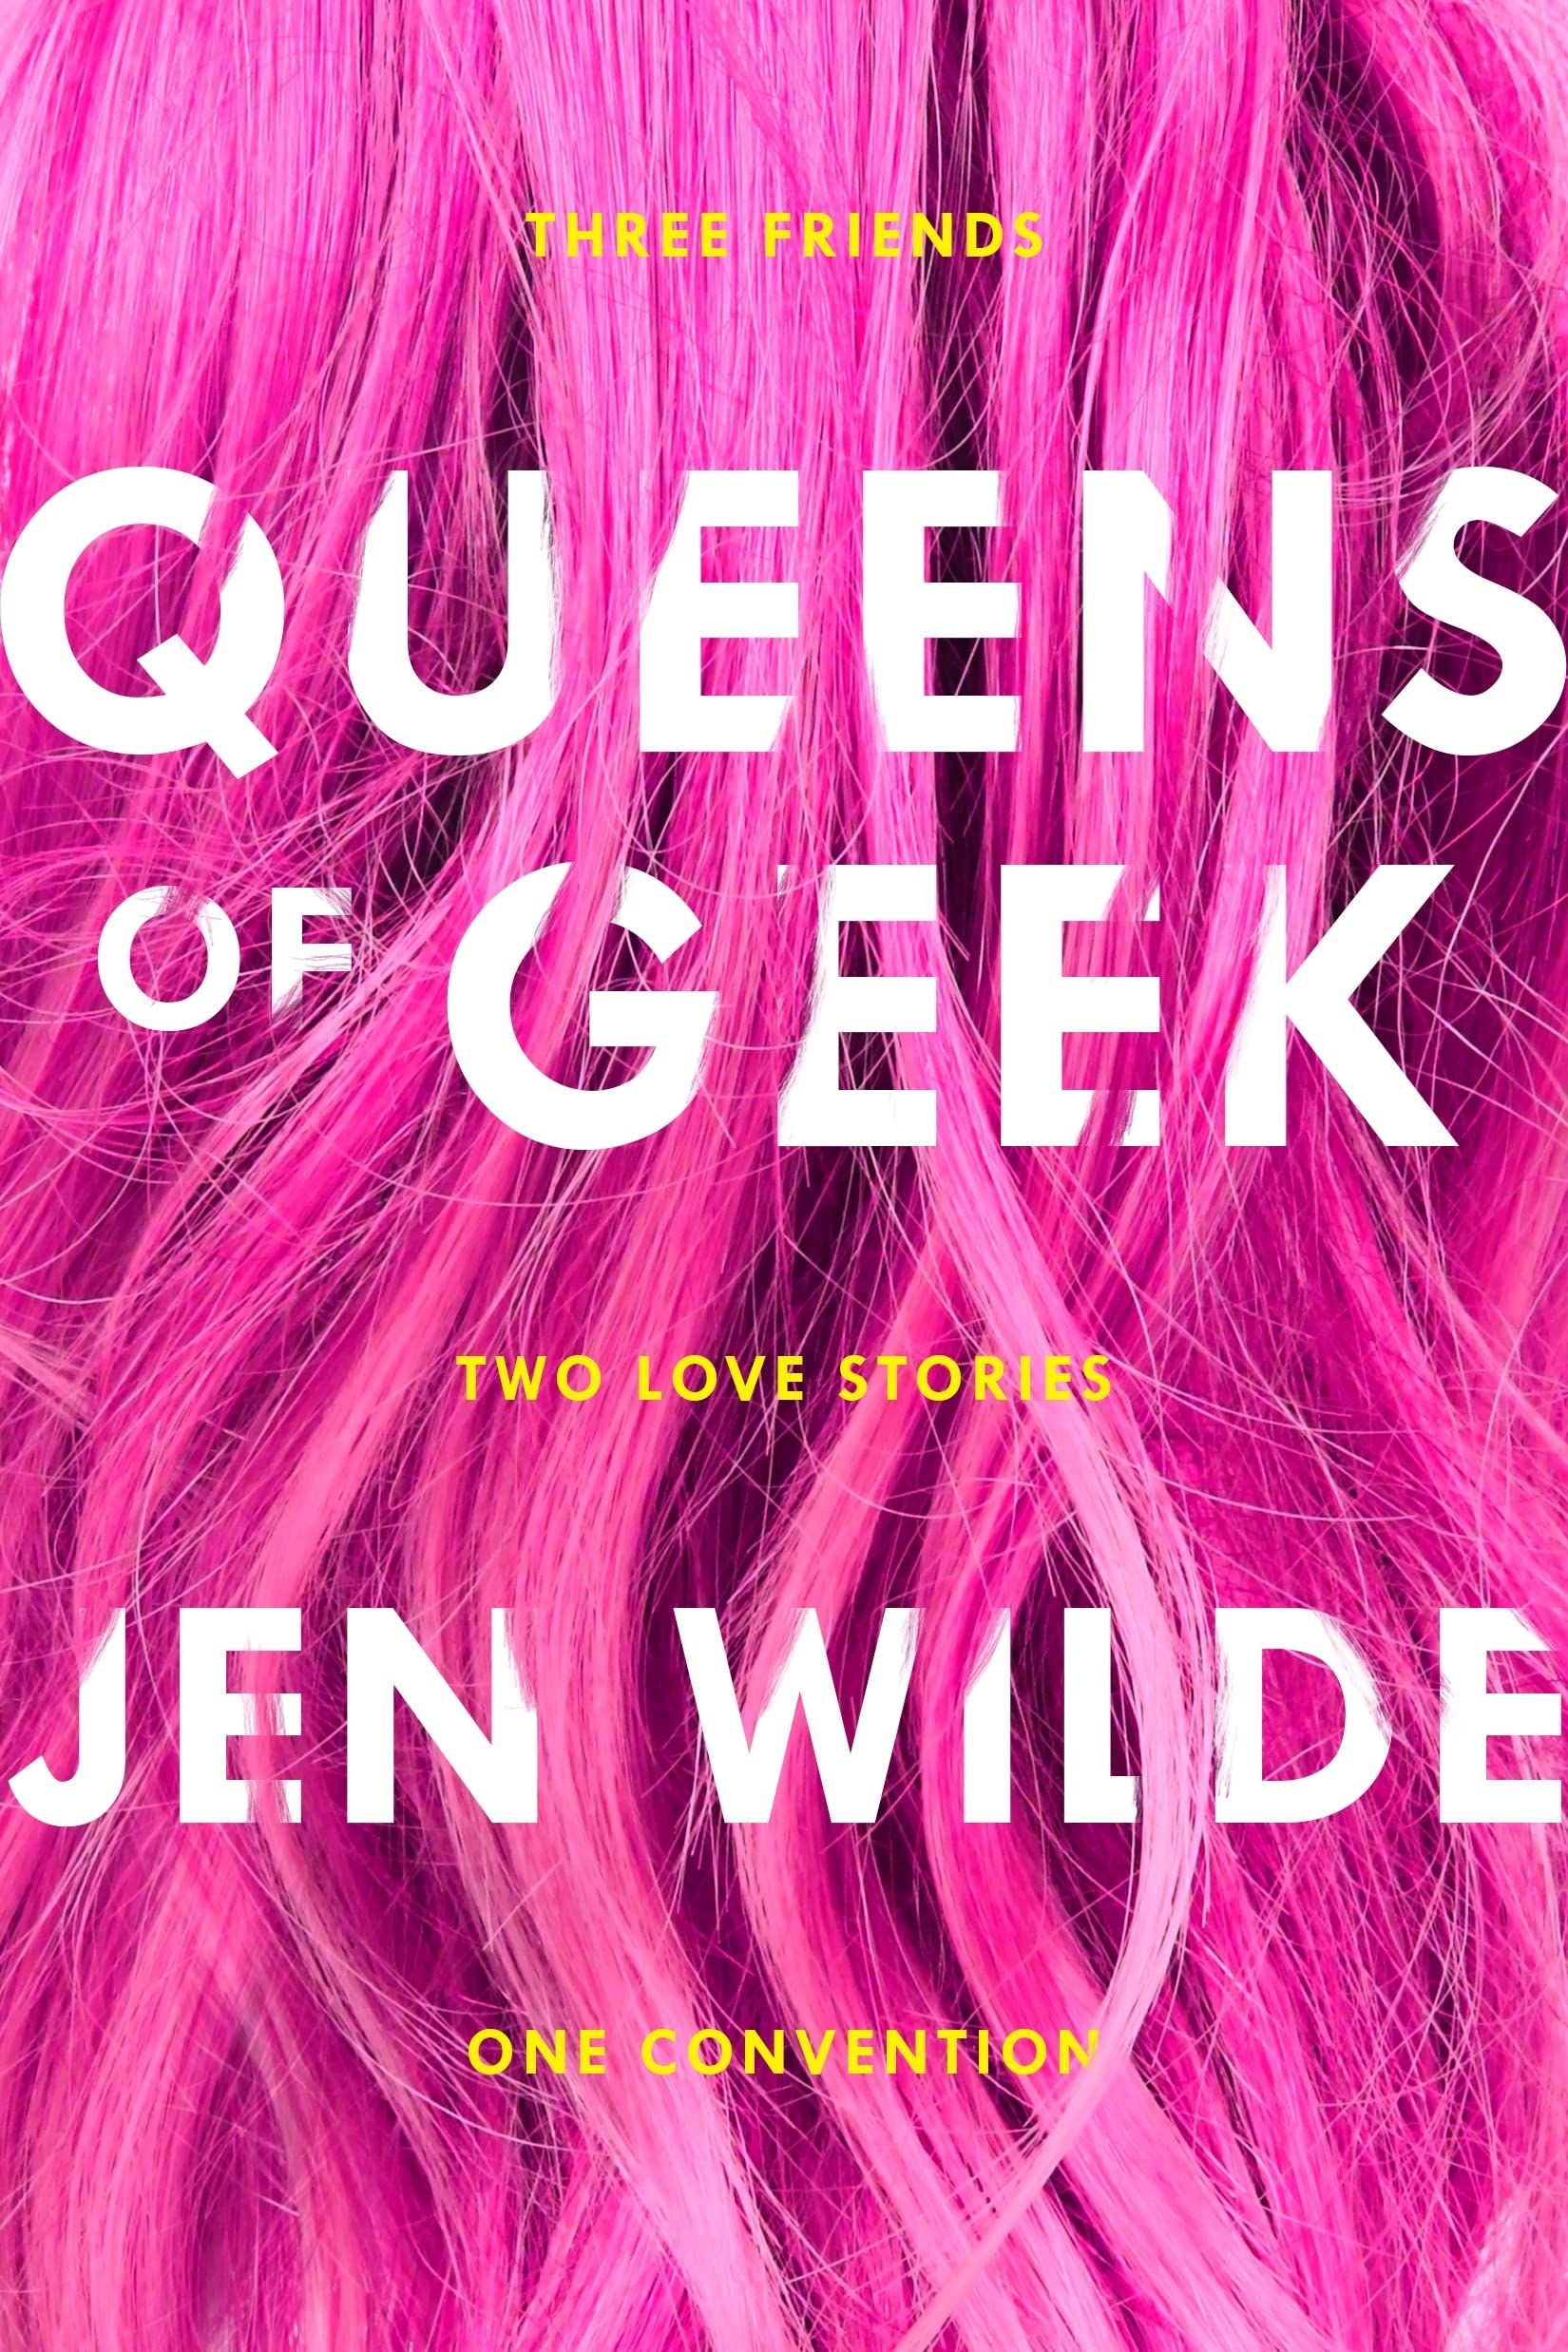 The cover of Queens of Geek: The title is shown over multiple strands of bright pink hair. 